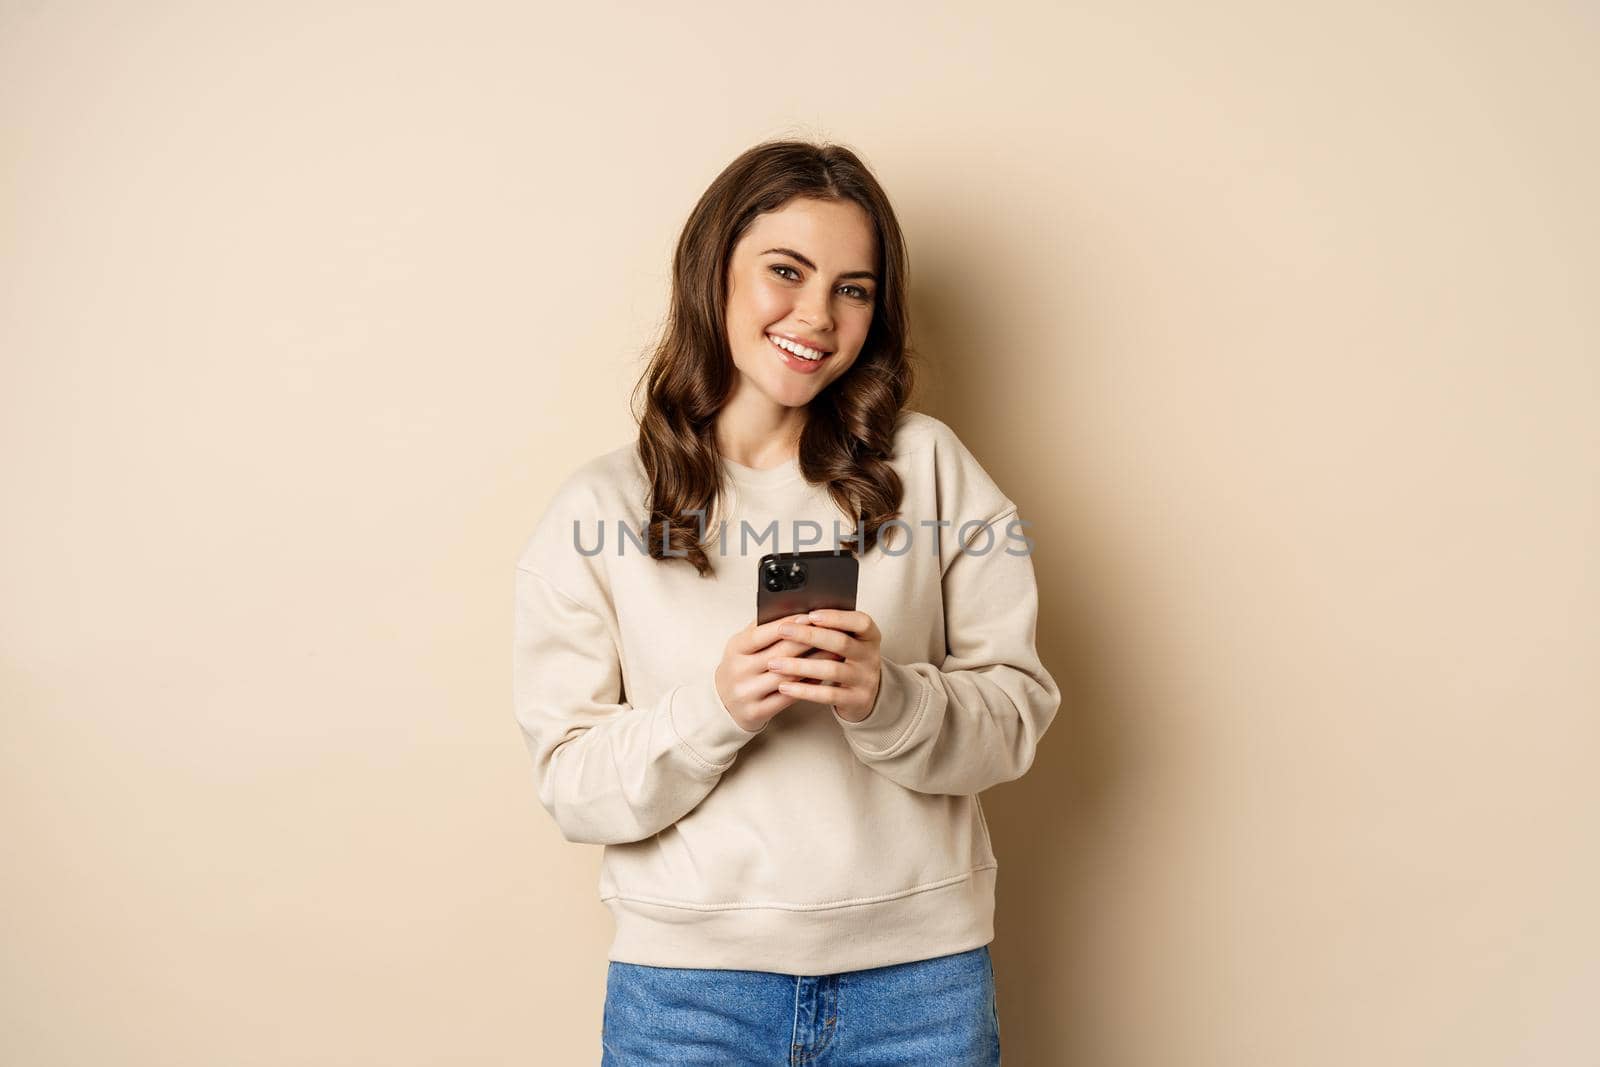 People and cellular technology. Beautiful stylish woman using mobile phone, smartphone app, smiling and looking at screen, standing over beige background.